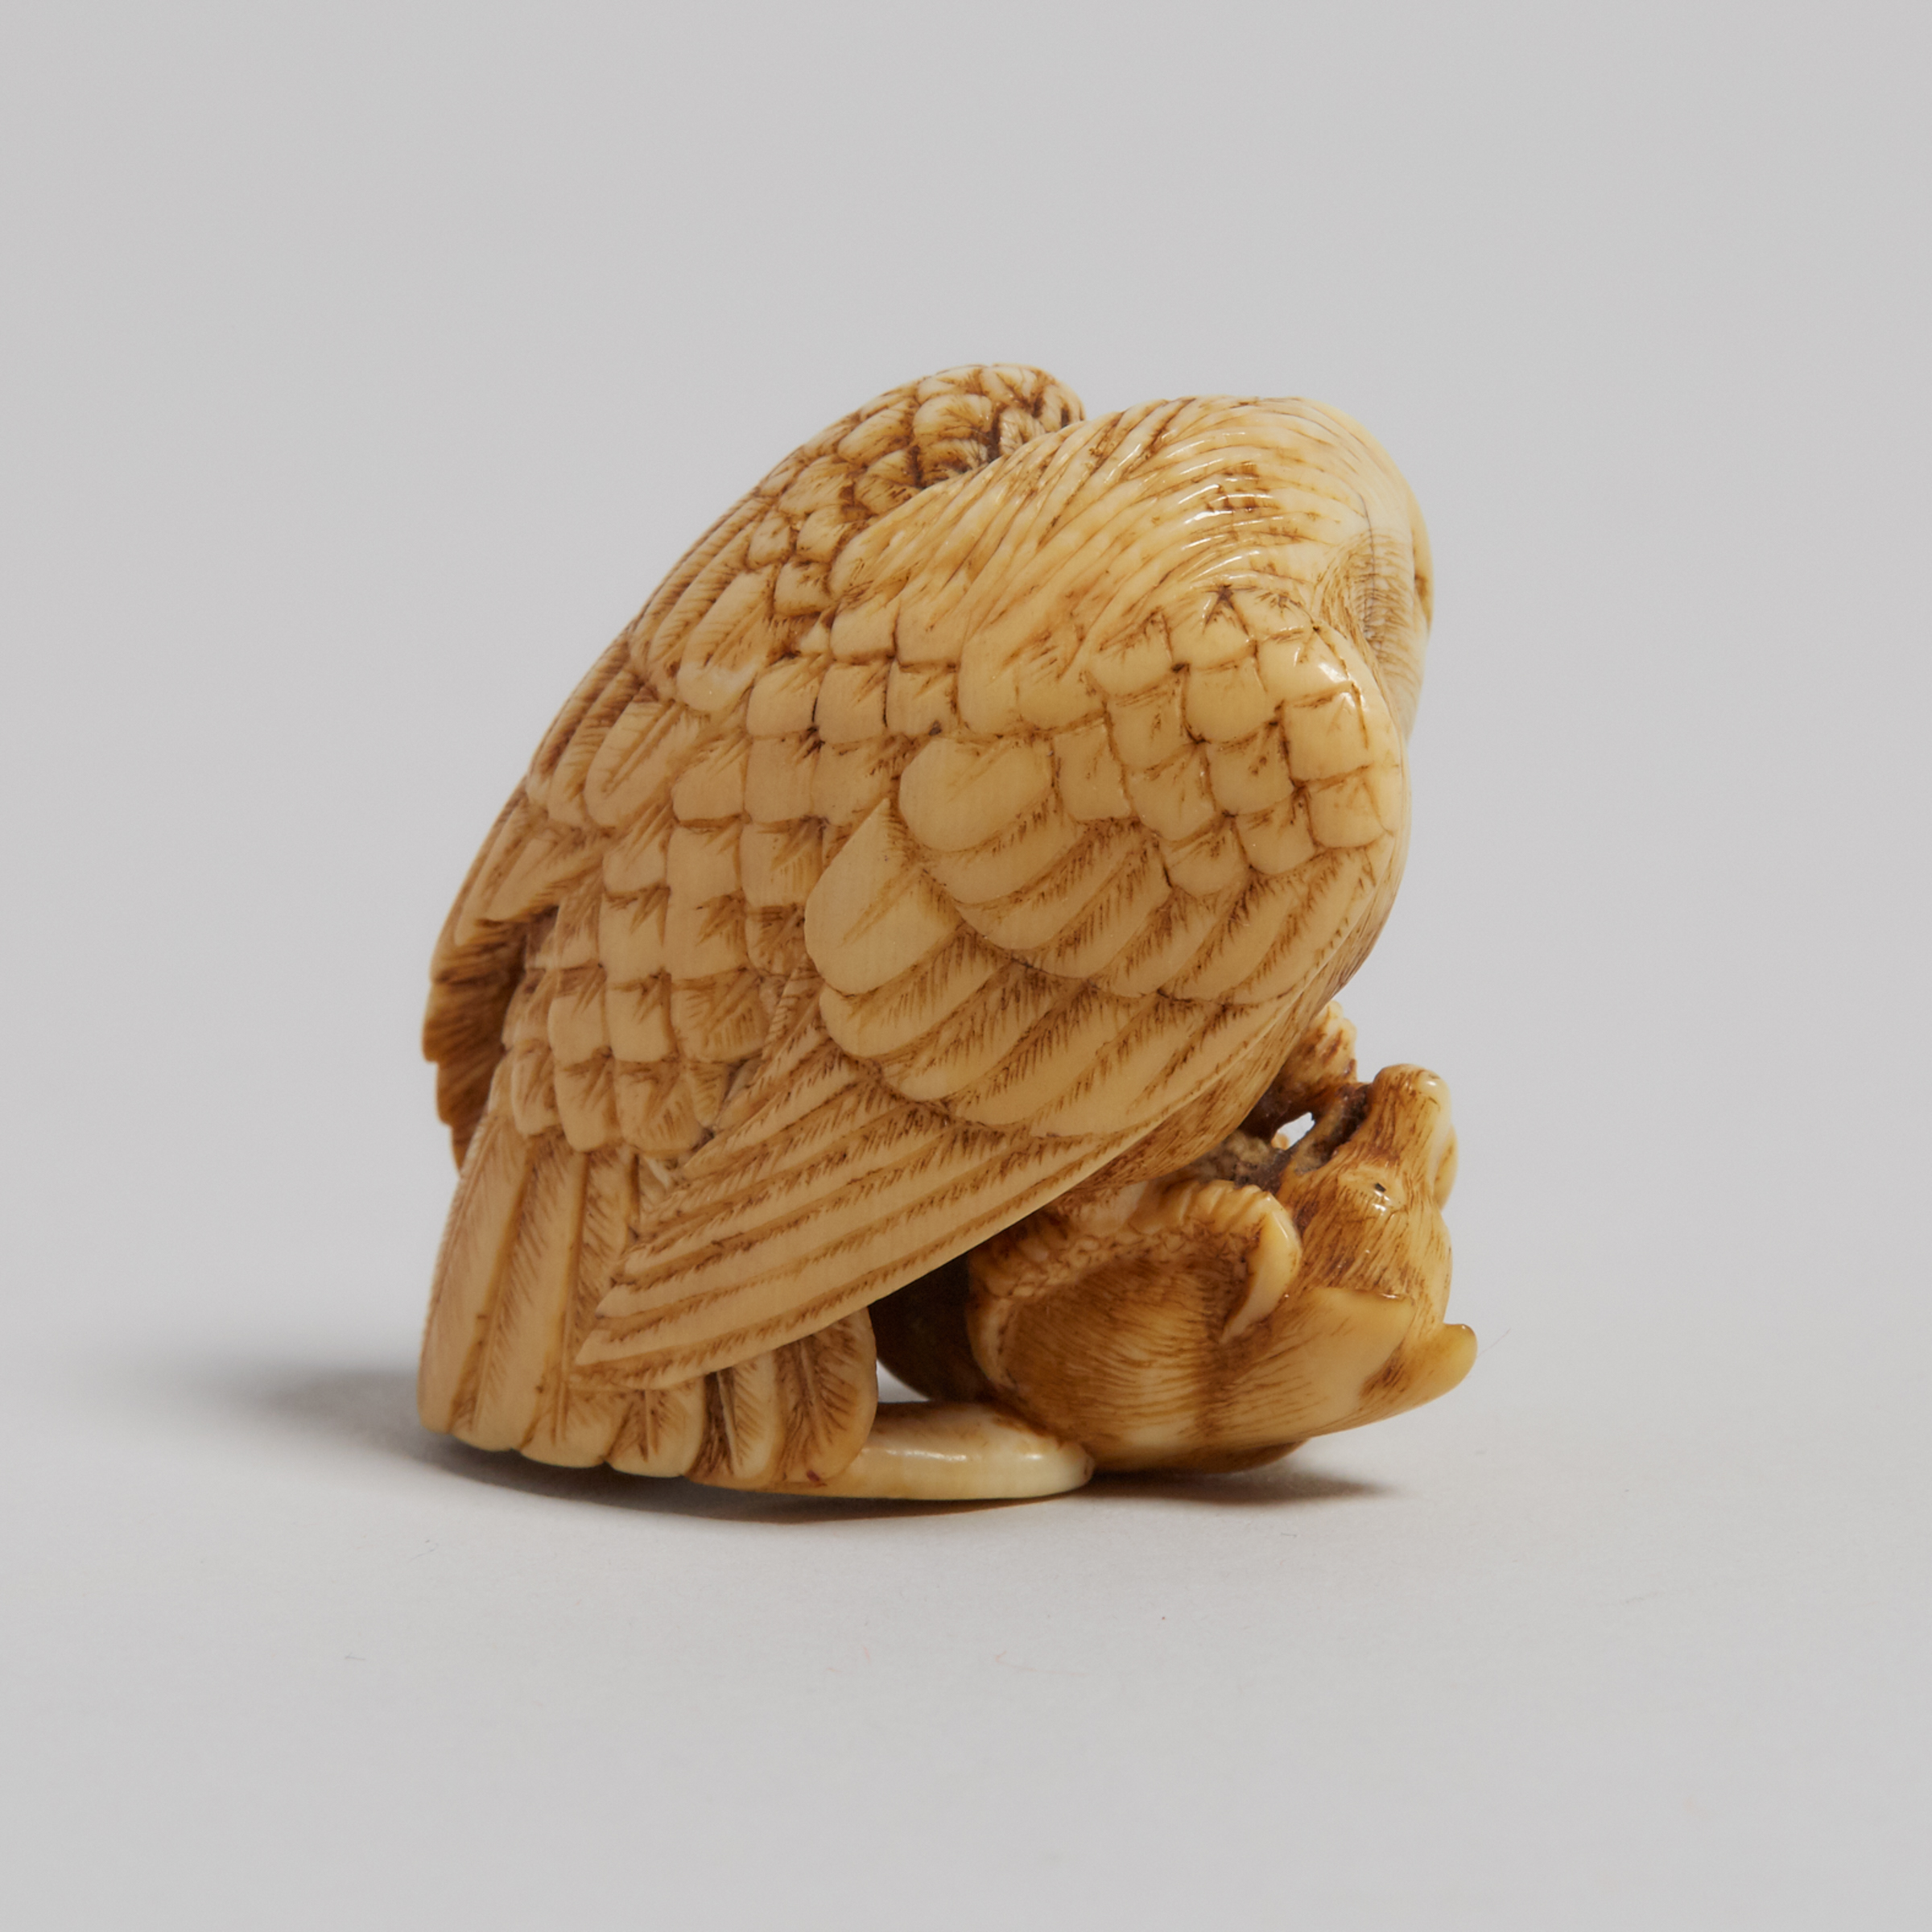 An Ivory Carved Netsuke of an Eagle and a Fox, Signed Tomochika, Late 19th Century